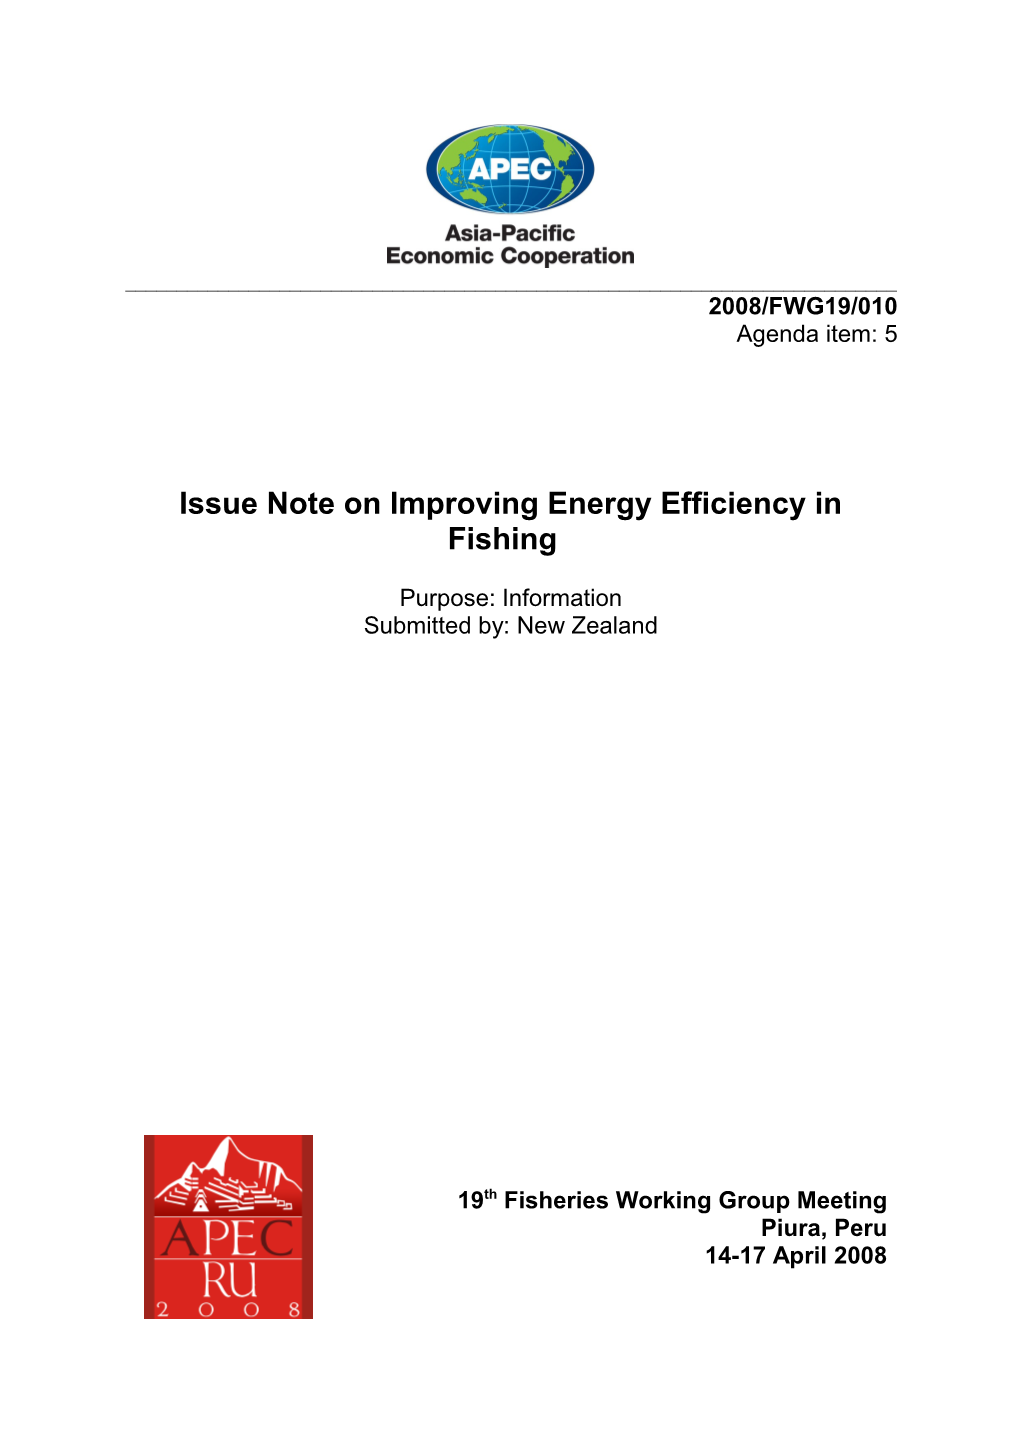 Issue Note on Improving Energy Efficiency in Fishing